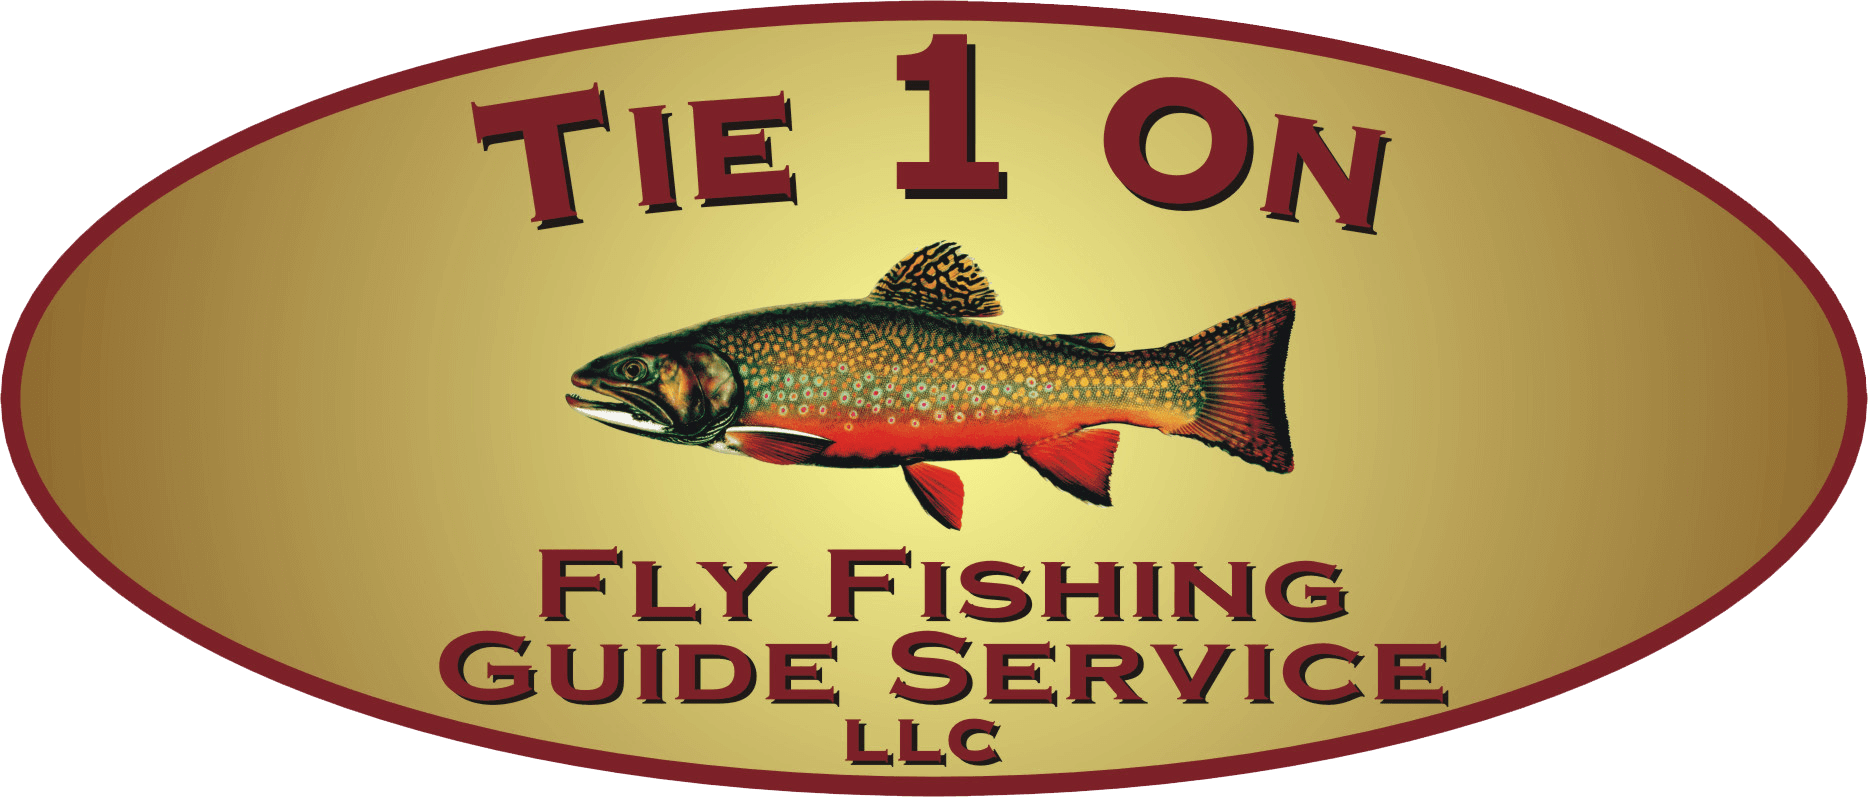 Tie 1 On Fly Fishing Guide Service - Sheboygan River Update